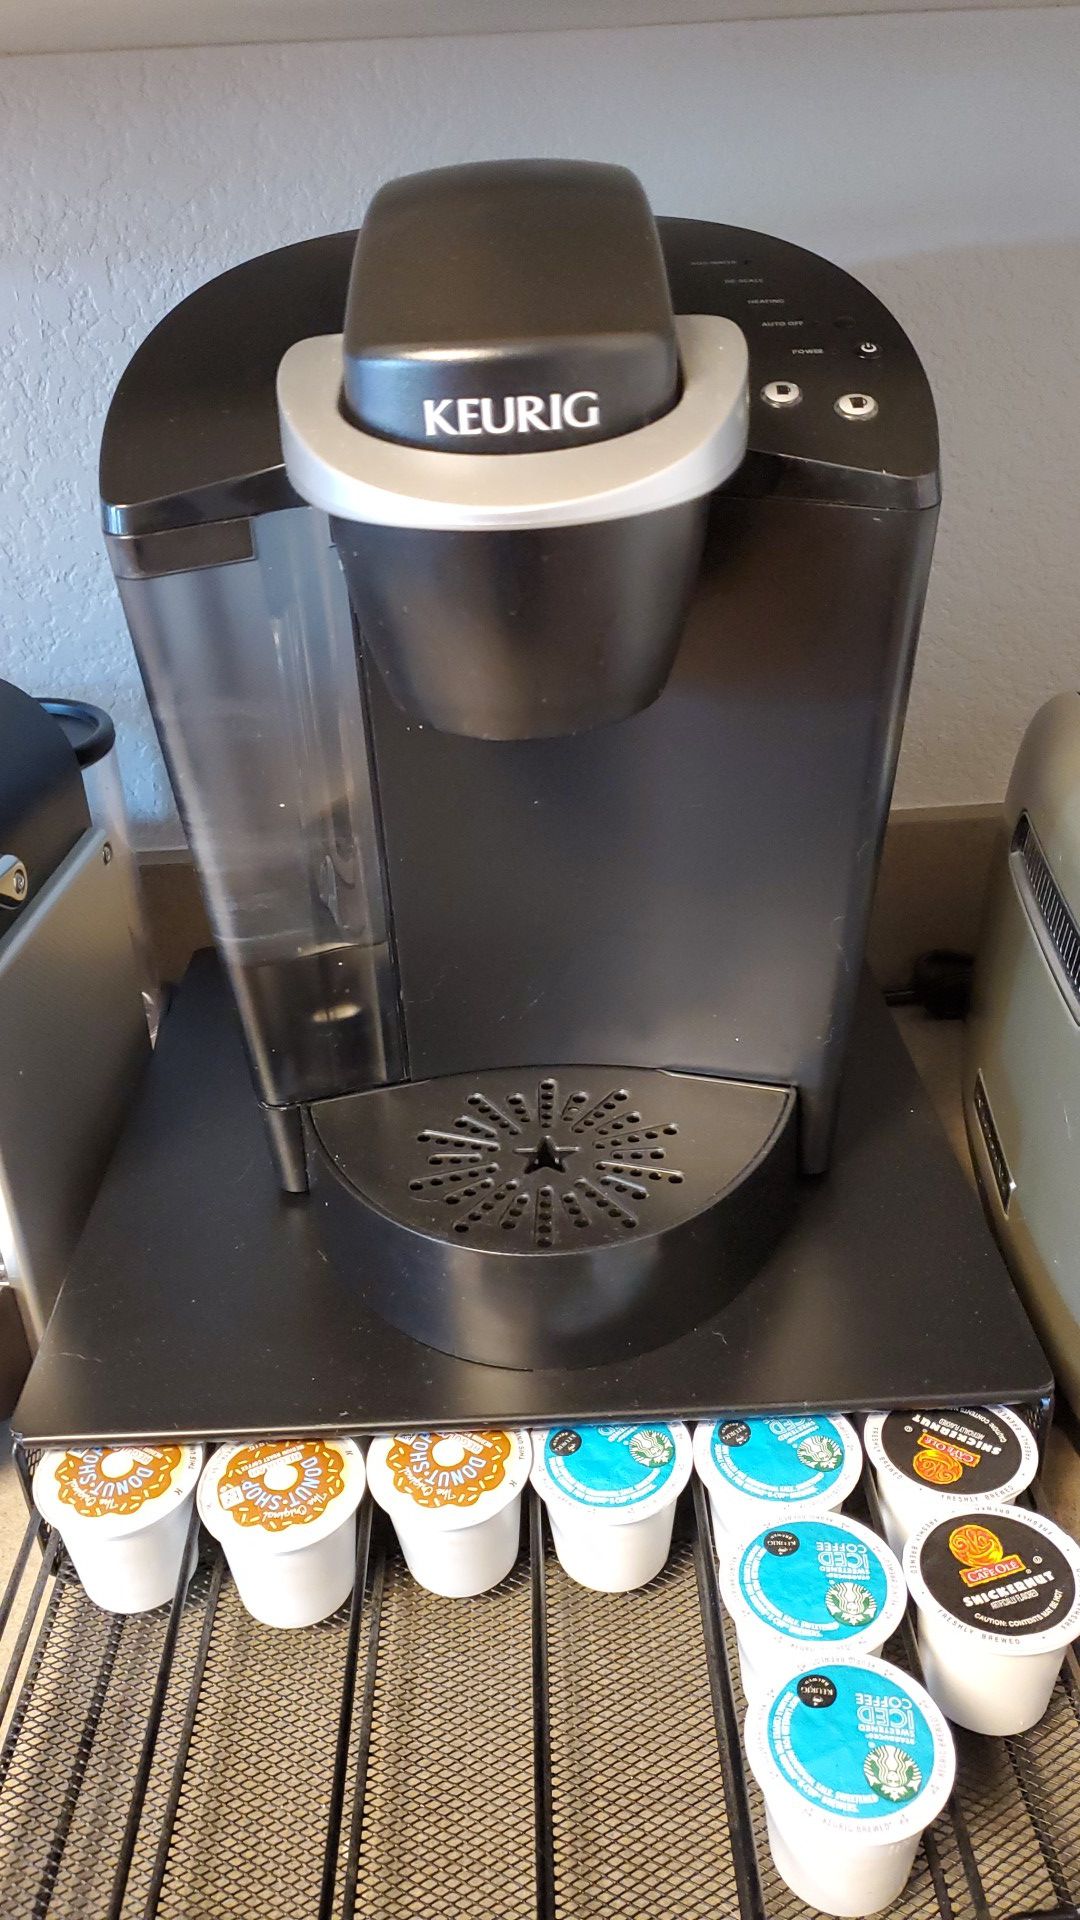 Older Keurig with stands for cup holders